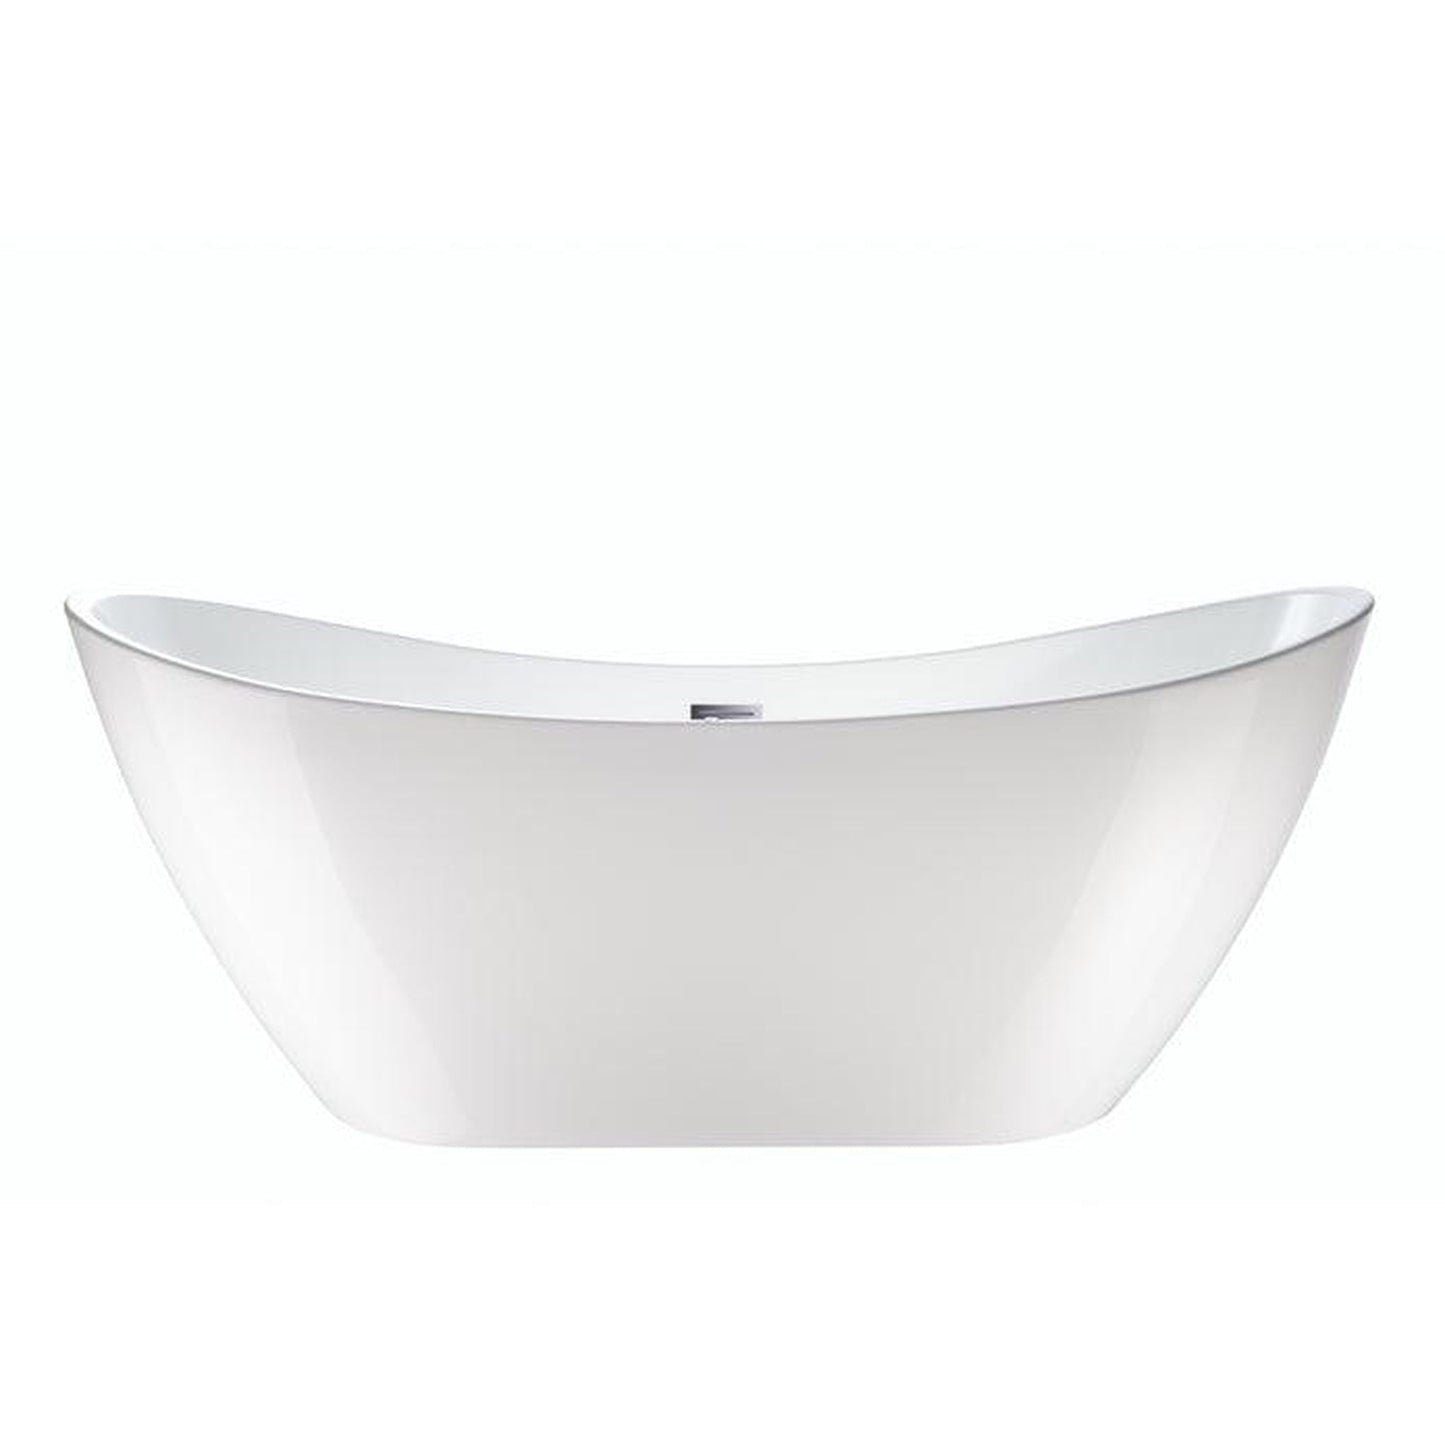 Vanity Art 71" W x 28" H White Acrylic Freestanding Bathtub With Polished Chrome Pop-up Drain, Slotted Overflow and Flexible Drain Hose